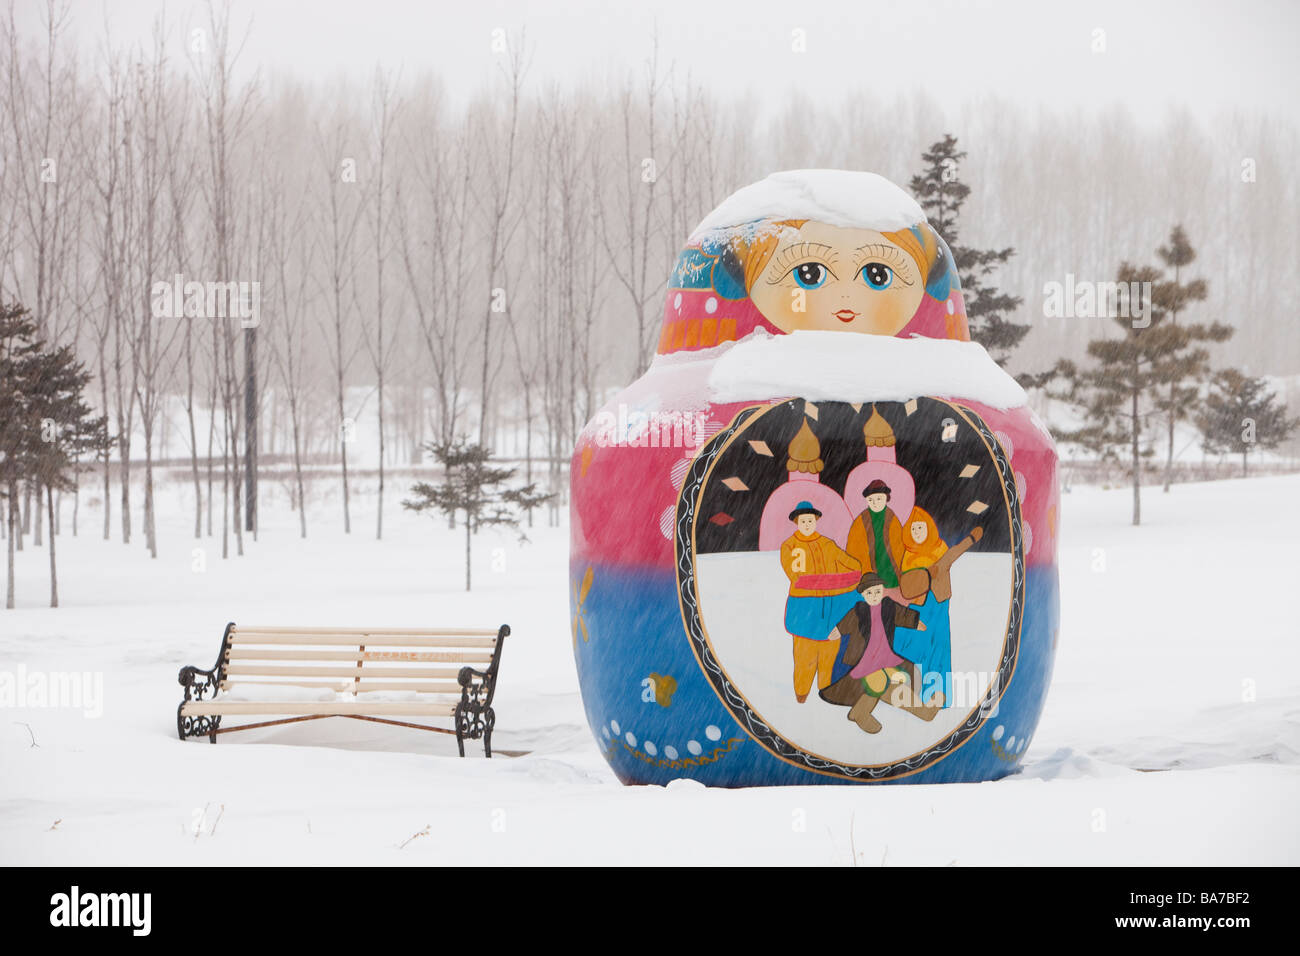 Russian dolls on the streets of the border city of Heihe in Northern China Heilongjiang province Stock Photo